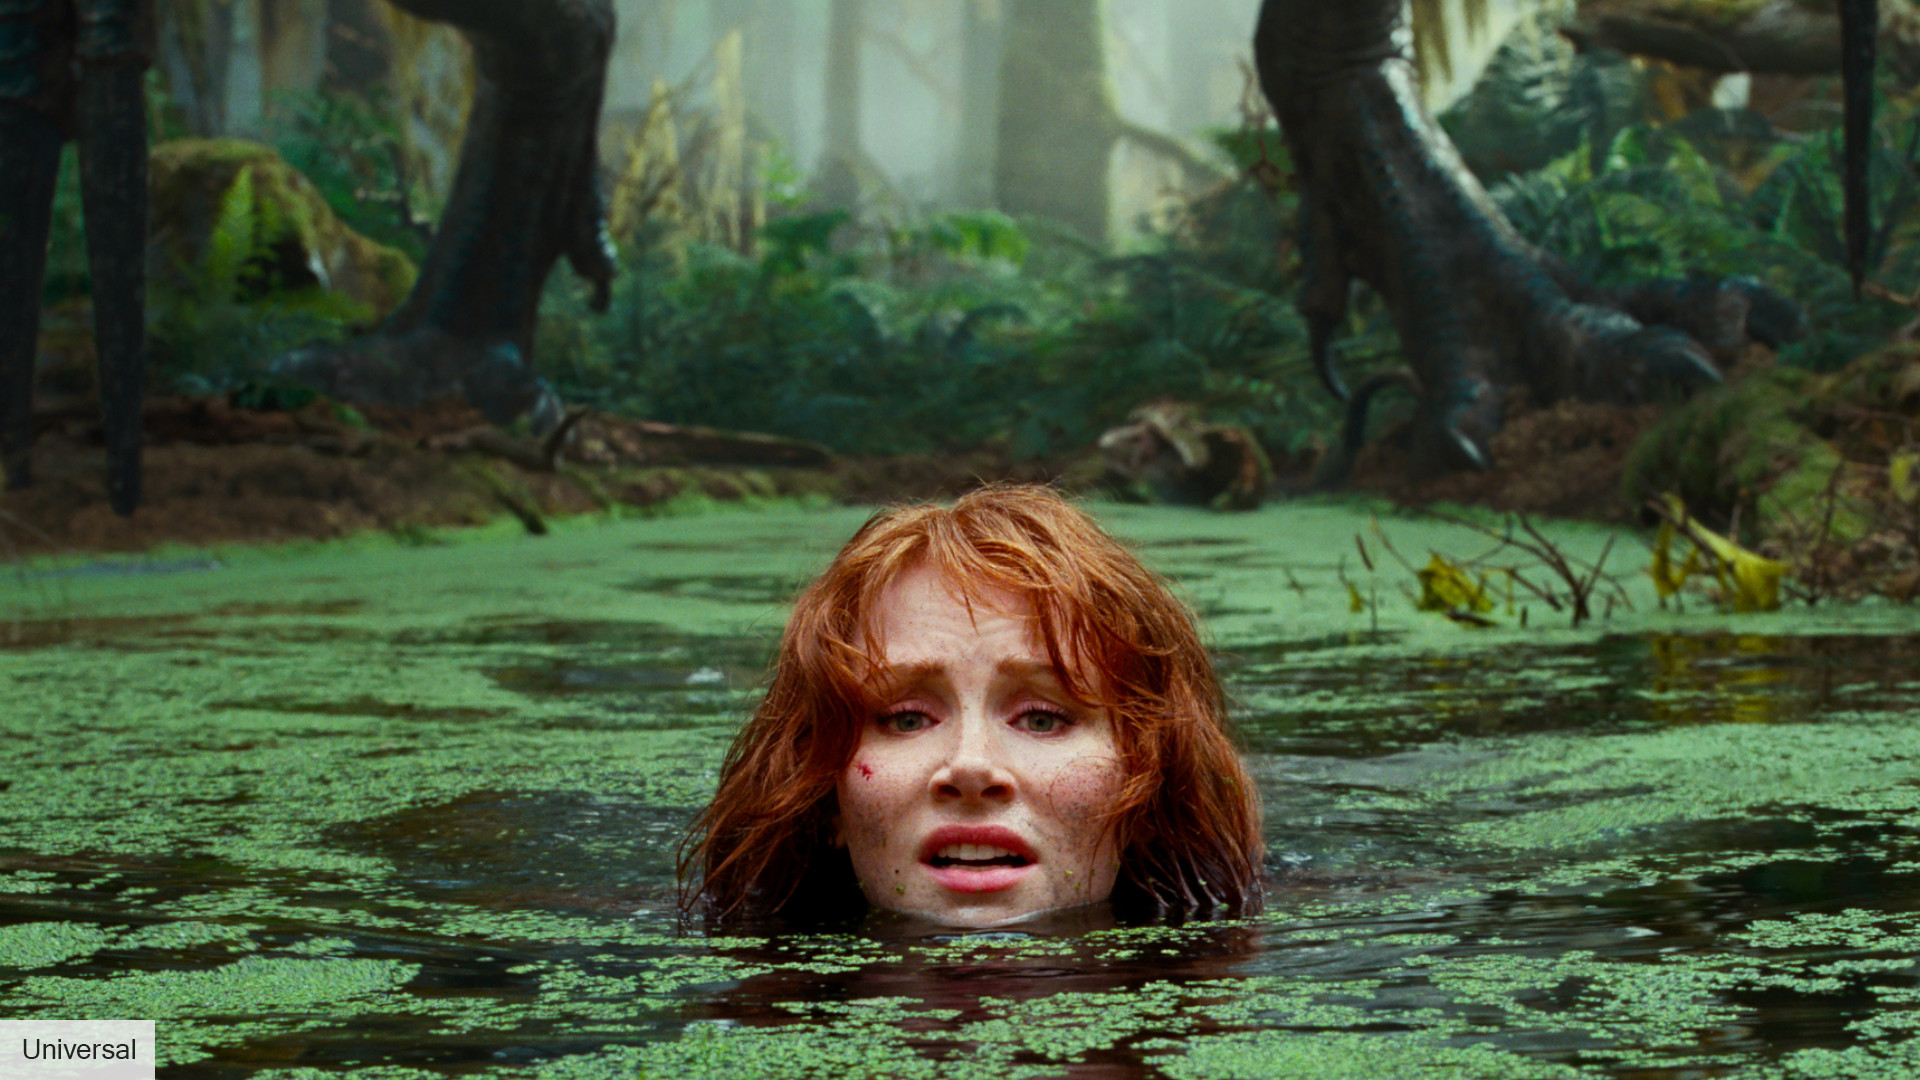 Jurassic World 4 release date: Claire in a swamp